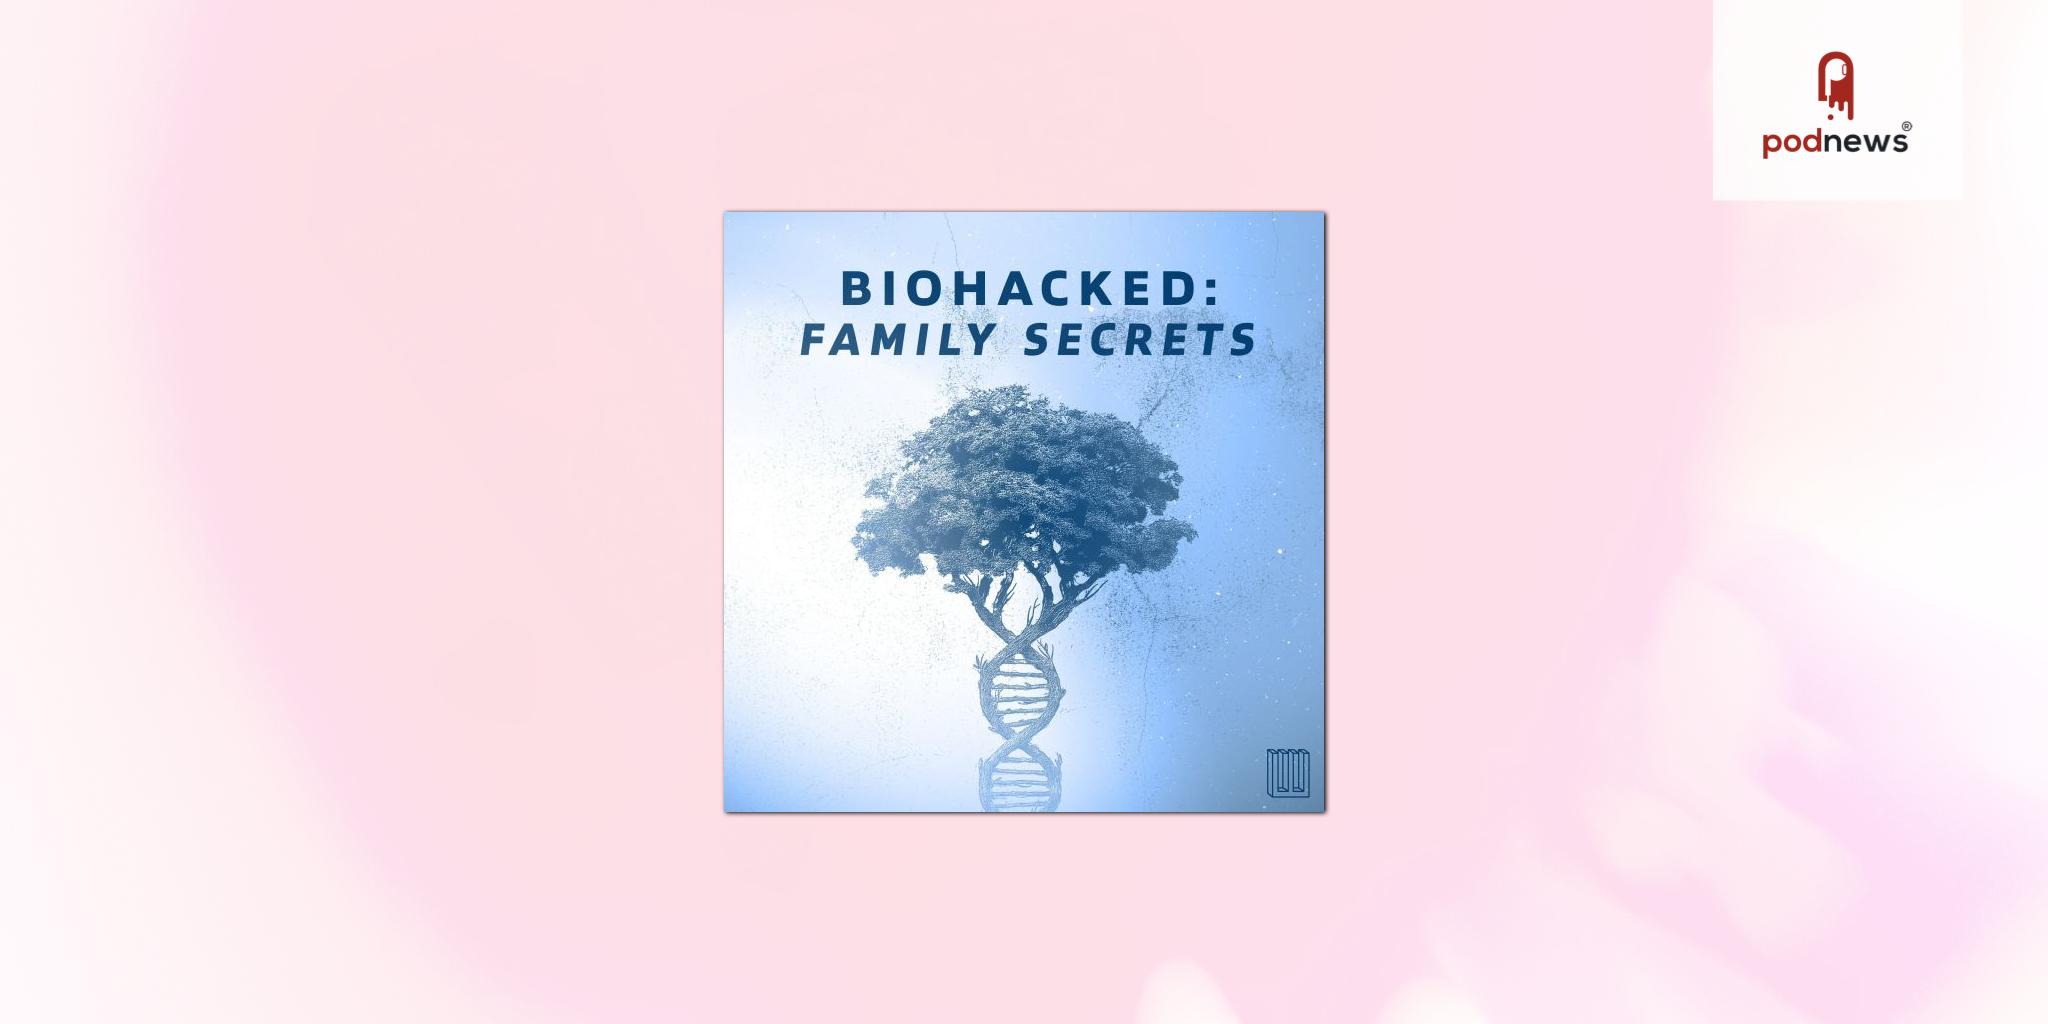 Biohacked: family secrets - a new podcast unveiling the startling true stories of the baby business